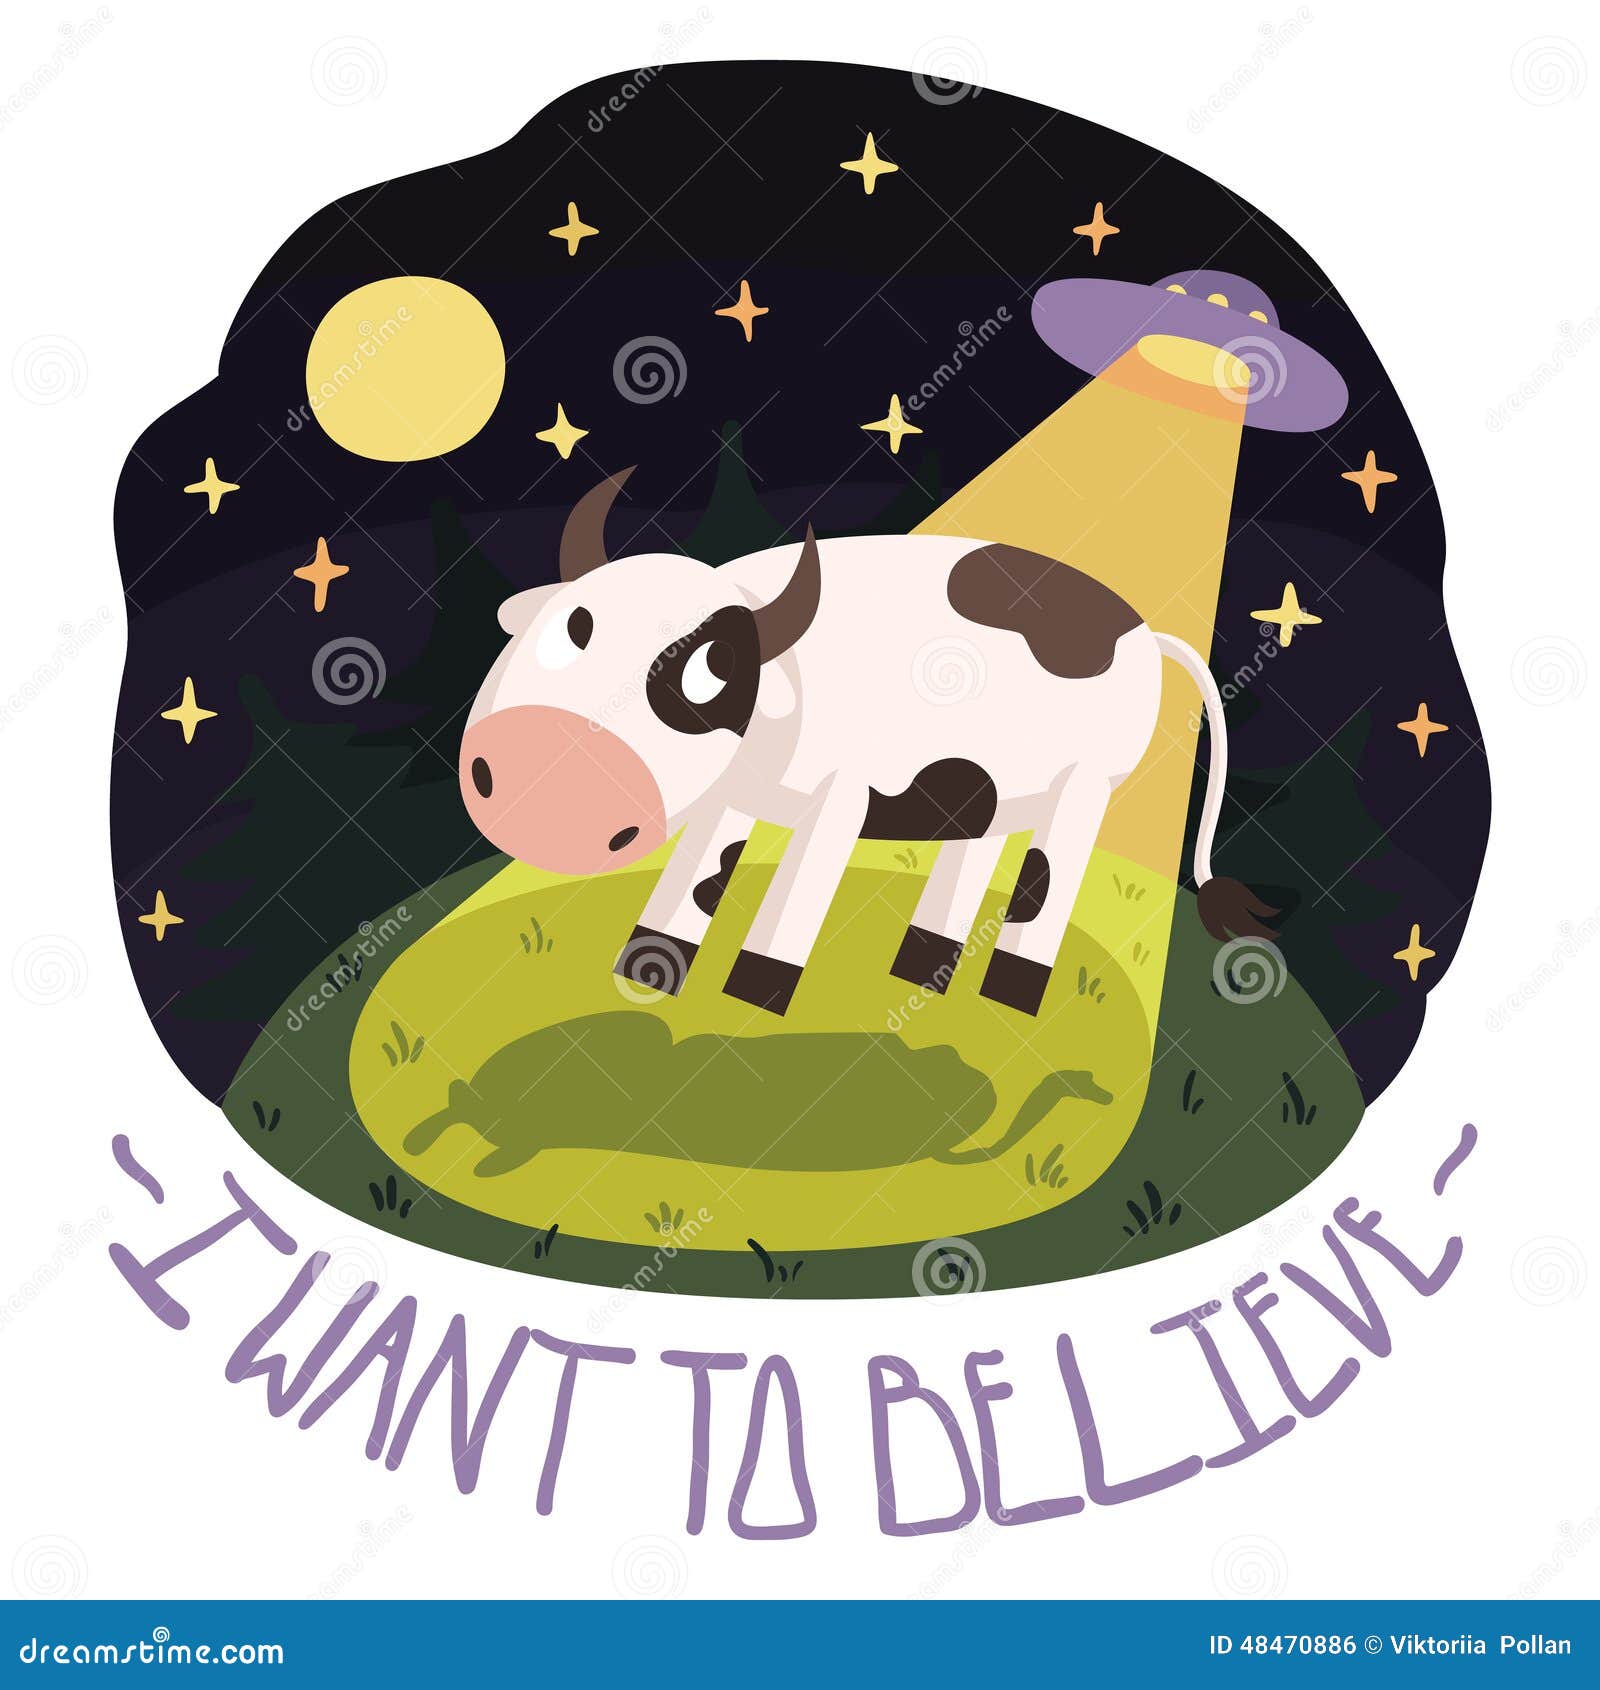 i-want-to-believe-vector-background-cowl-ufo-poster-card-cow-hill-night-full-moon-stars-cartoon-48470886.jpg